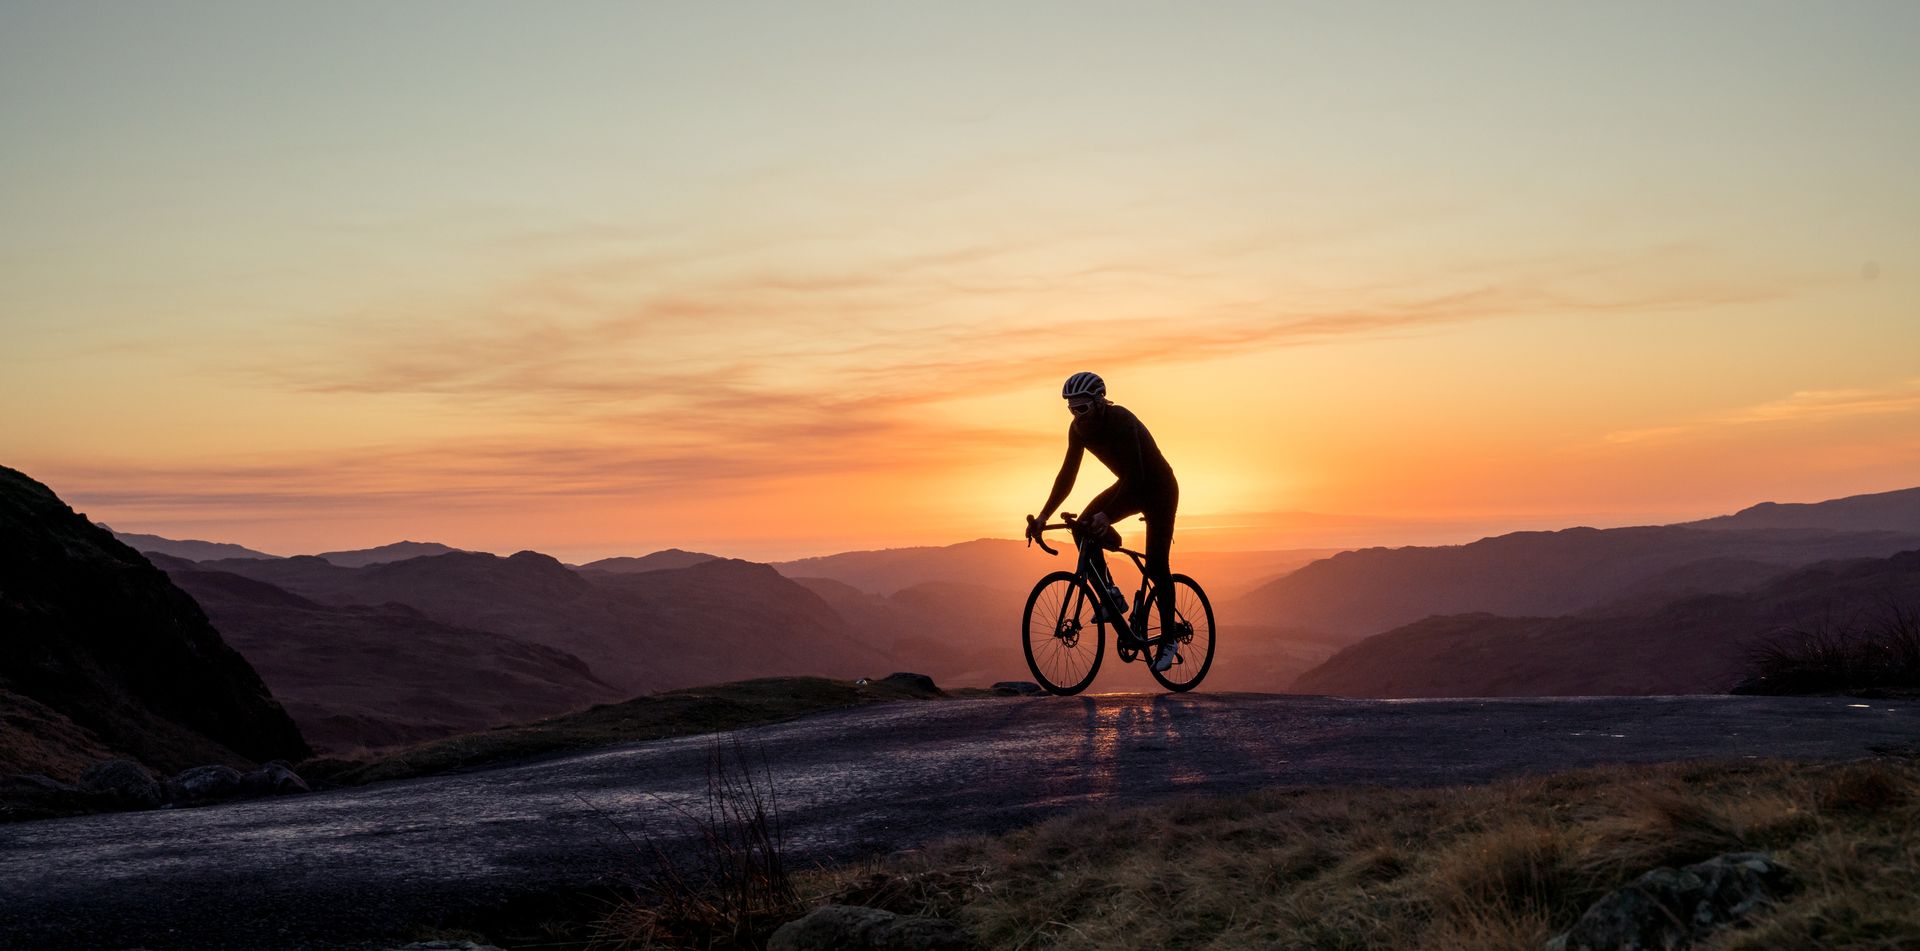 Kevin Merrey riding the Pulsium 3.0 disc bike under the sunset